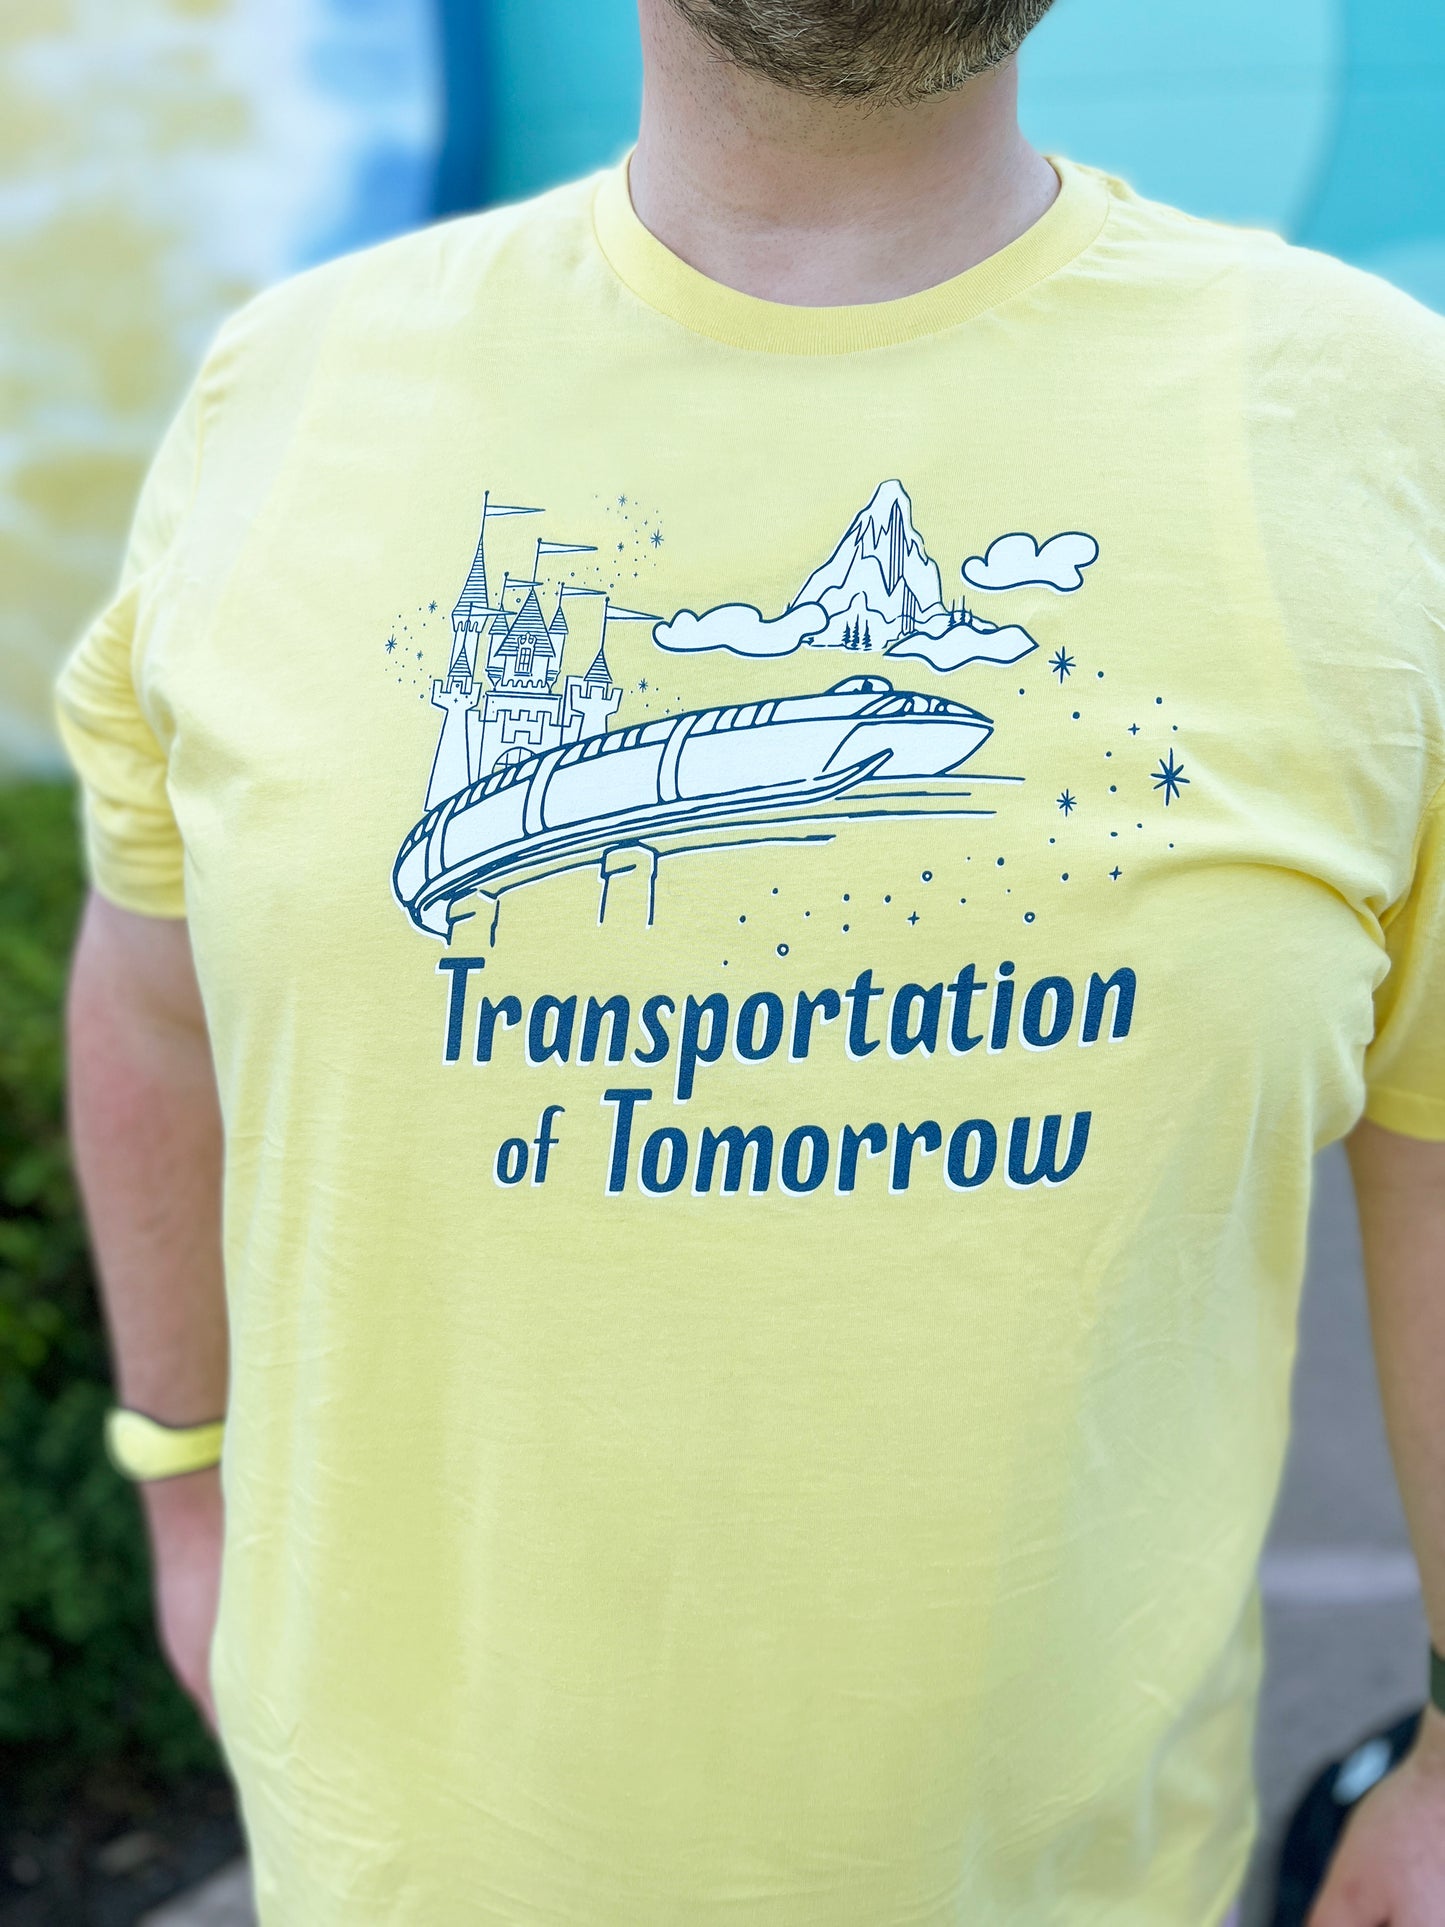 Man wearing a yellow shirt printed with vintage style sketch of the Matterhorn, Castle, and Monorail with pixie dust. The shirt says Transportation of Tomorrow.